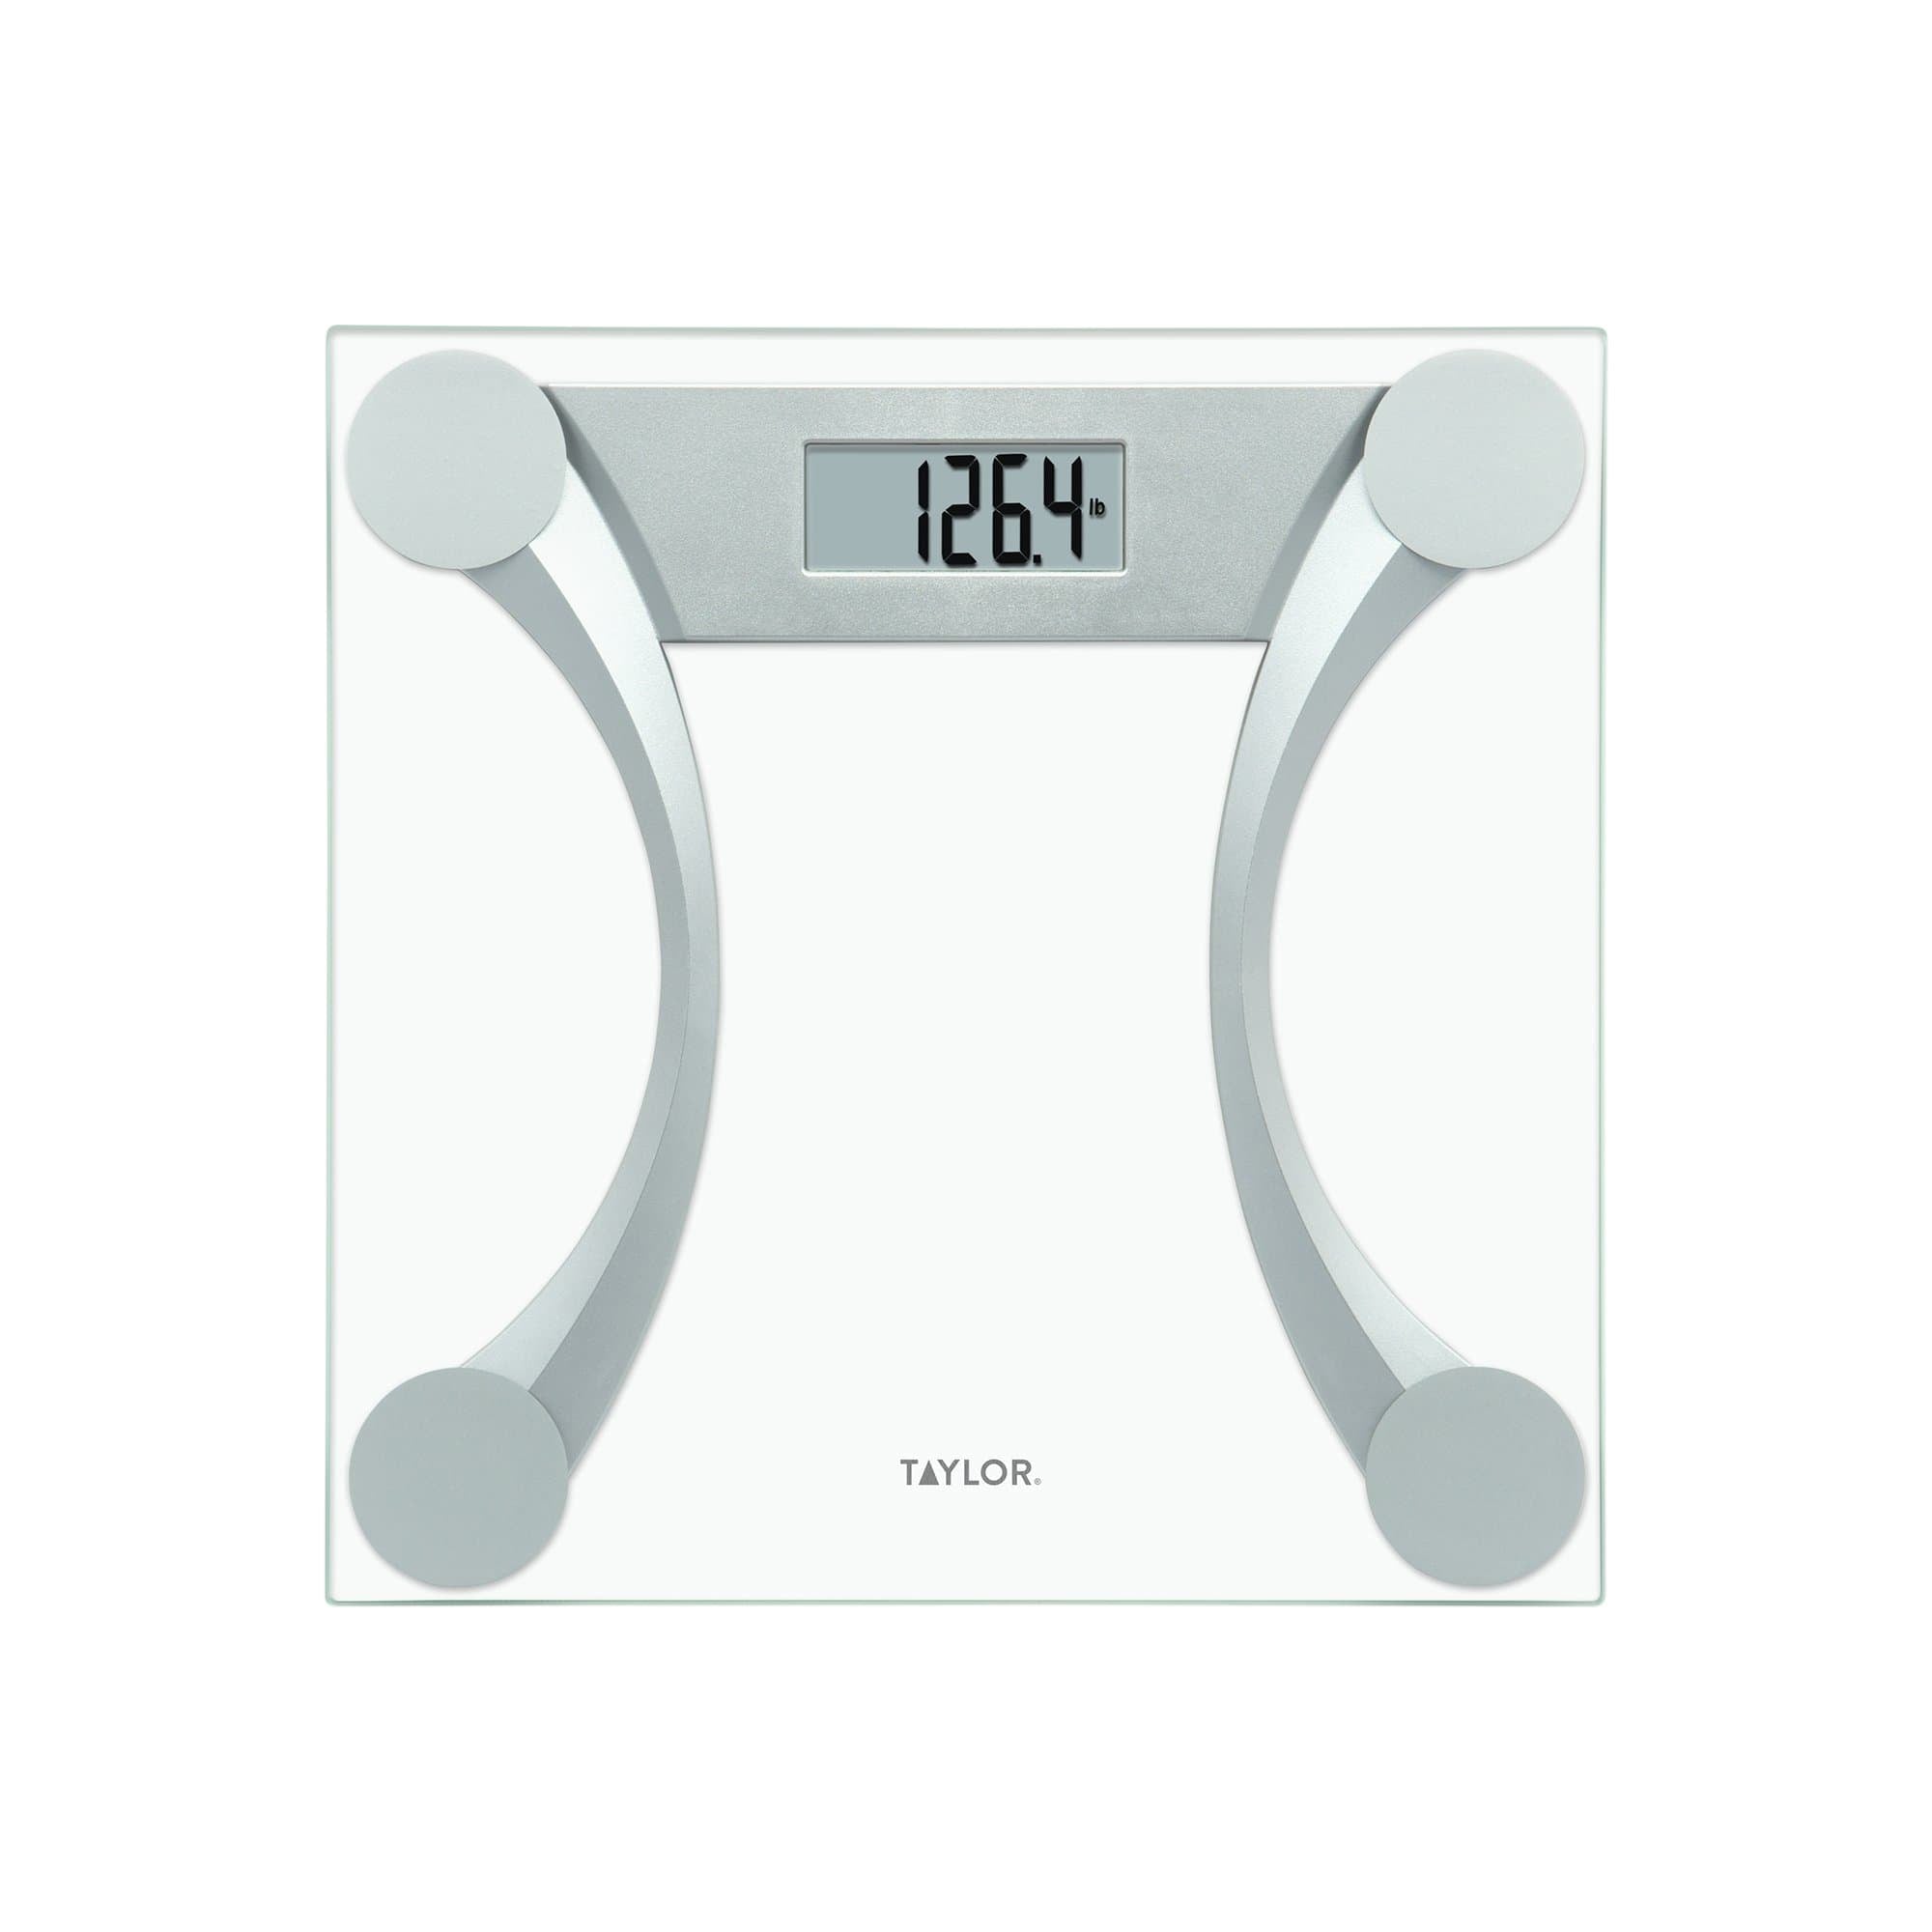 Taylor Digital Bathroom Scale Clear Silver Accents